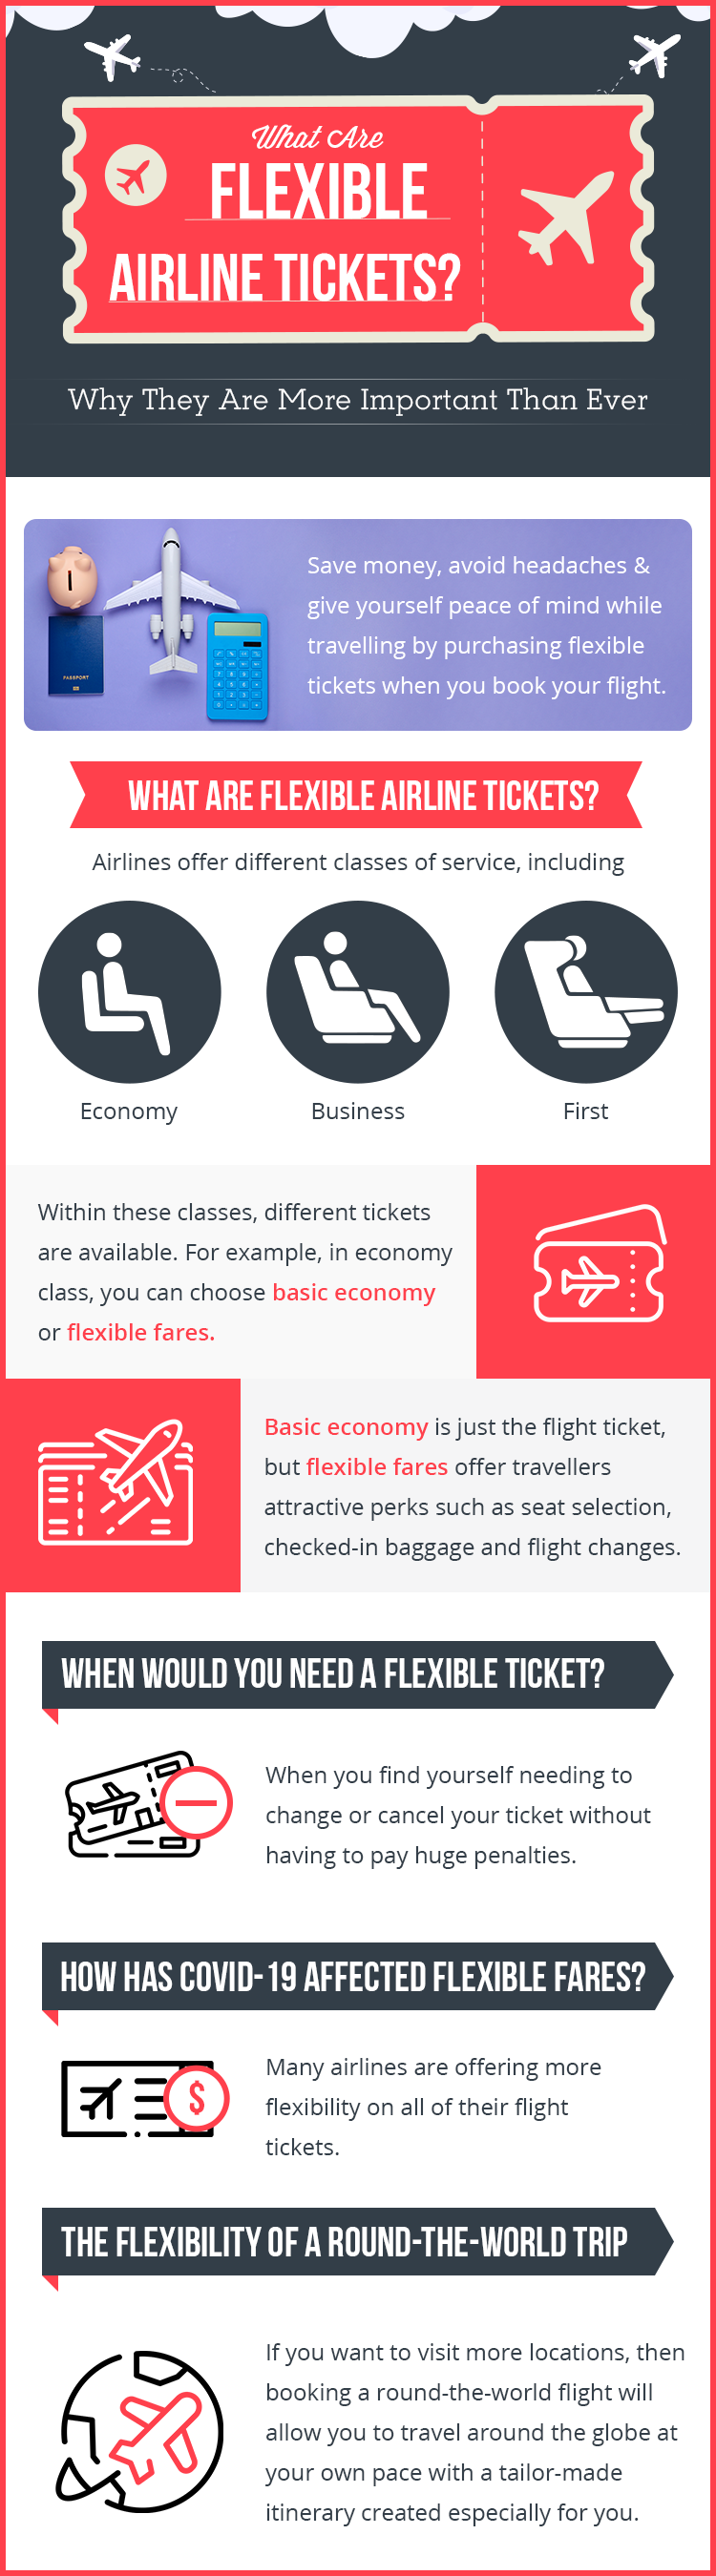 What Are Flexible Airline Tickets? Why They Are More Important Than Ever